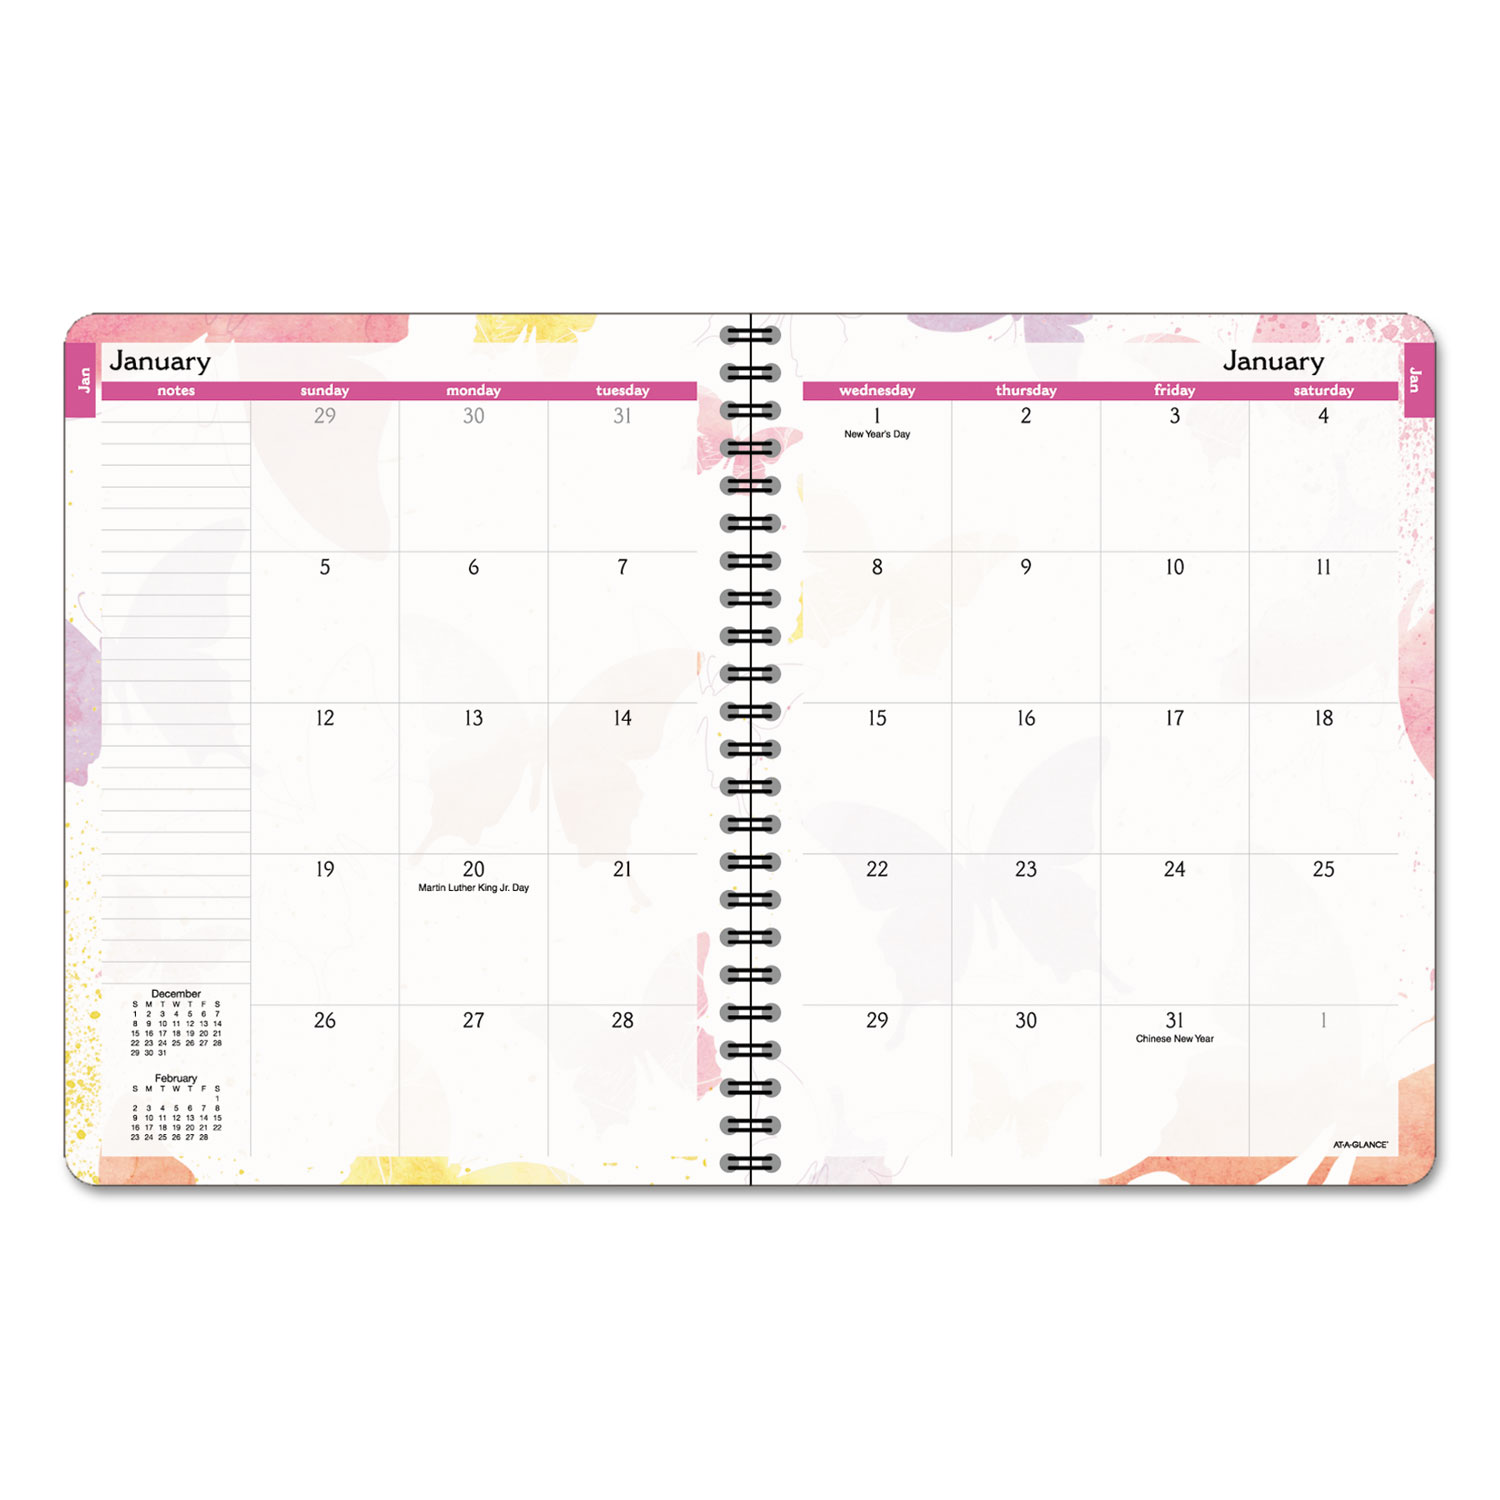 Watercolors Monthly Planner, 6 7/8 x 8 3/4, Watercolors, 2018-2019